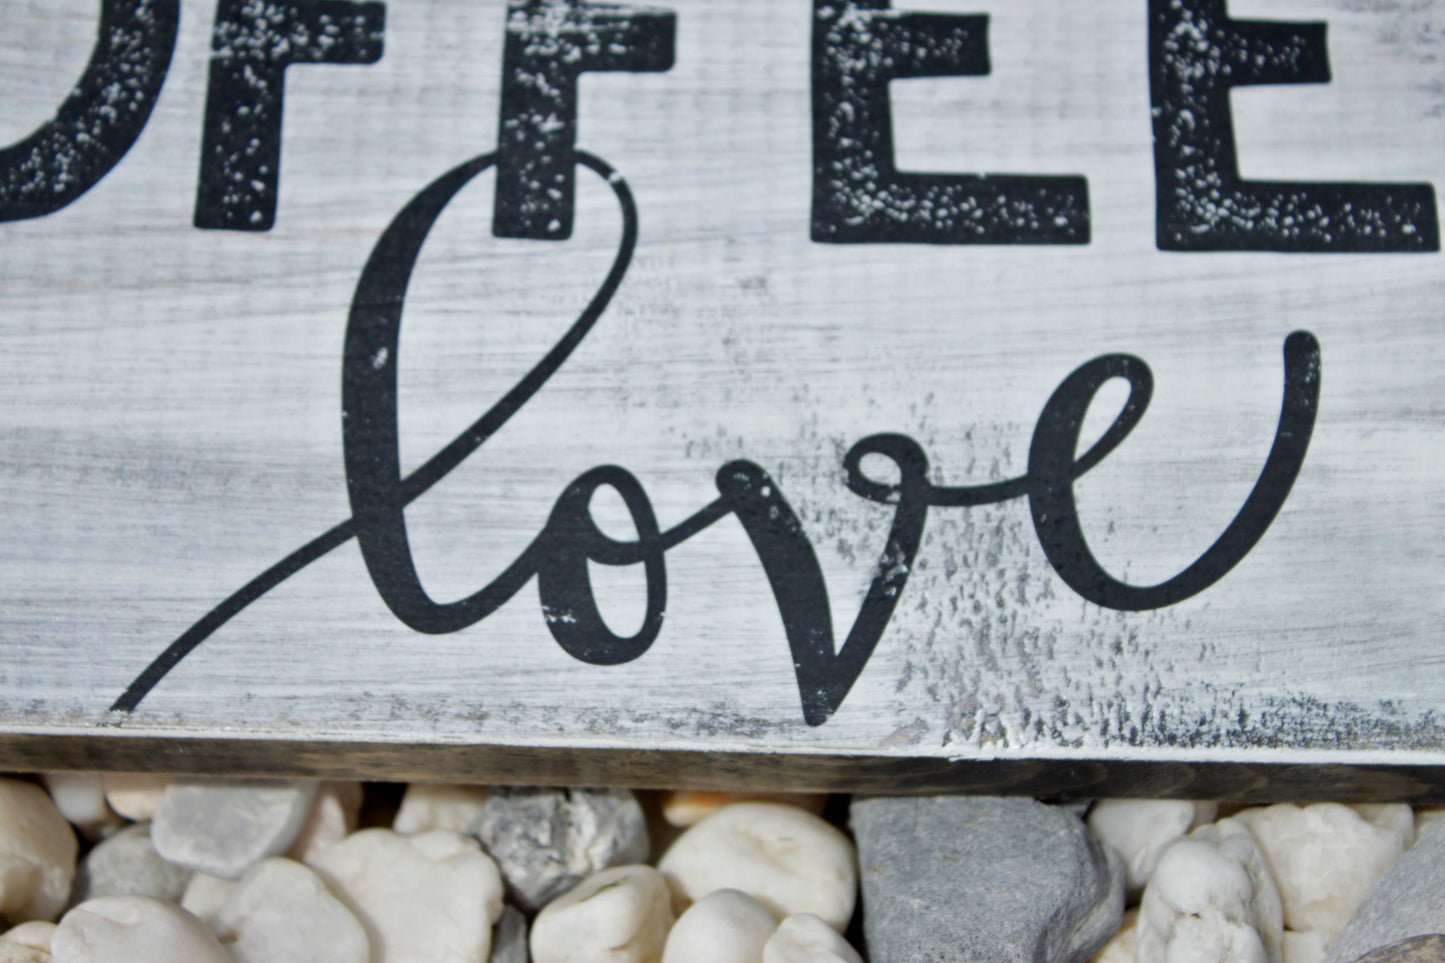 Home Decor. Distressed Finish. Coffee Love Wood Sign.  Gift for Coffee Lover.  Rustic Coffee Bar Decor.